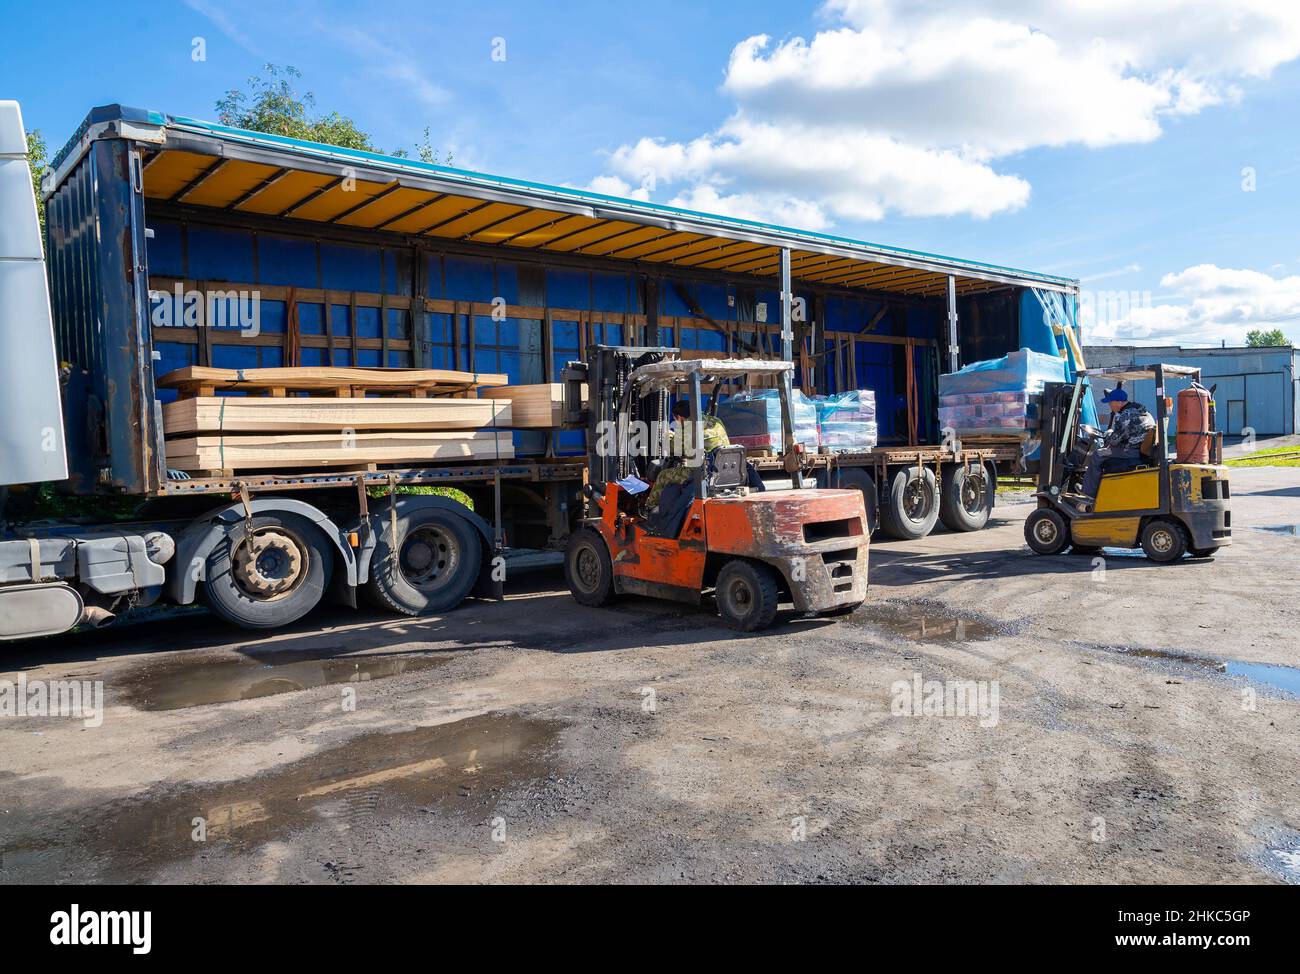 SAINT PETERSBURG, RUSSIA - SEPTEMBER 10, 2021: Two loaders load goods into a semi-trailer Stock Photo